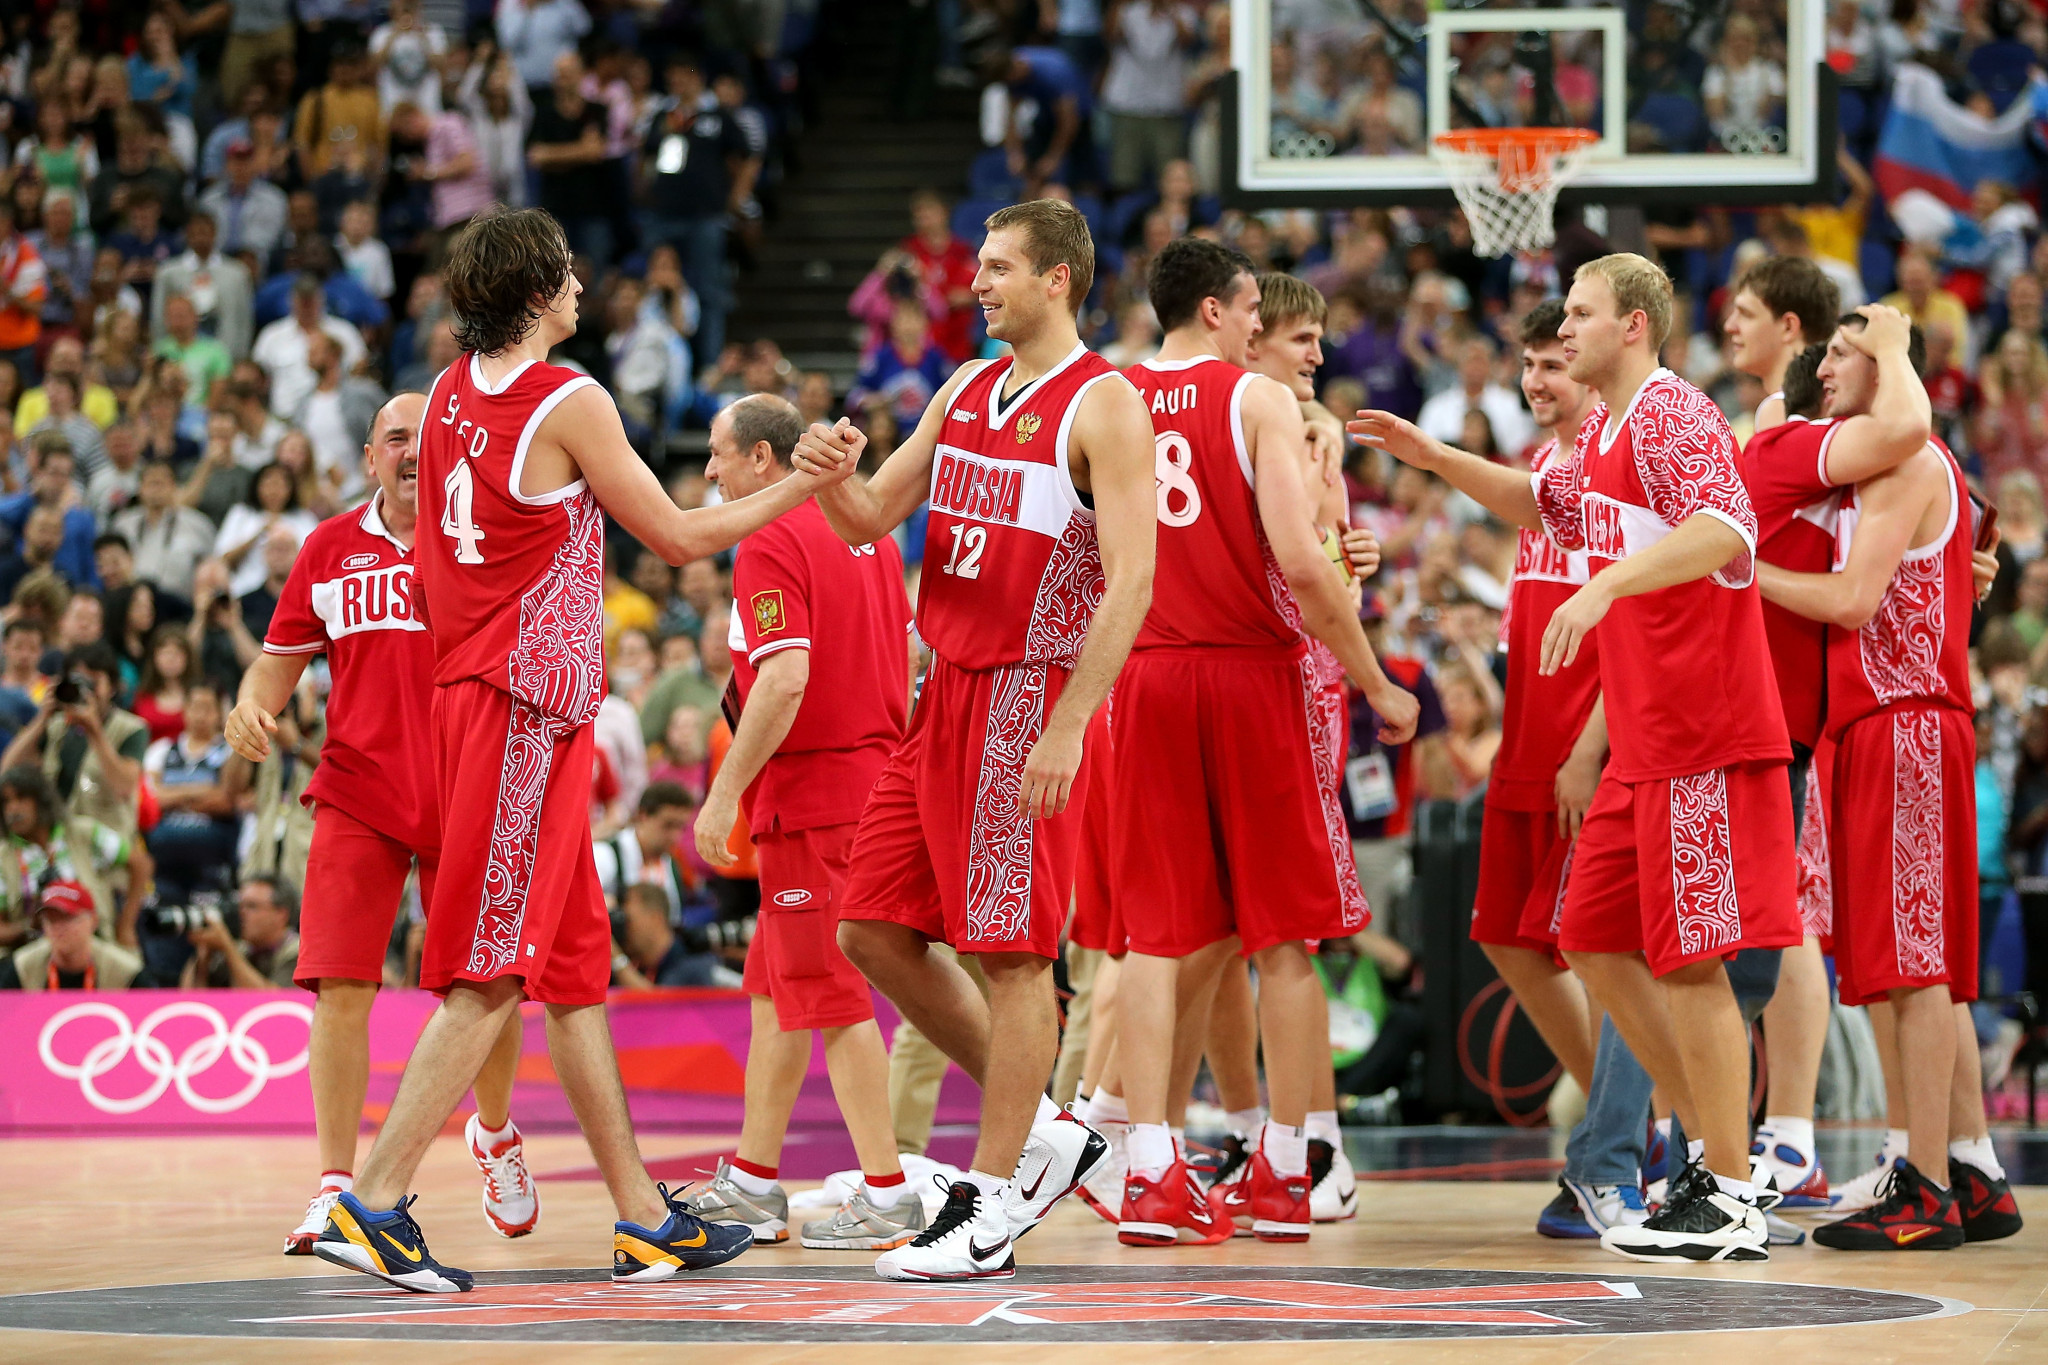 London 2012 bronze medallists Russia have been banned from competing in men's basketball at Paris 2024 ©Getty Images